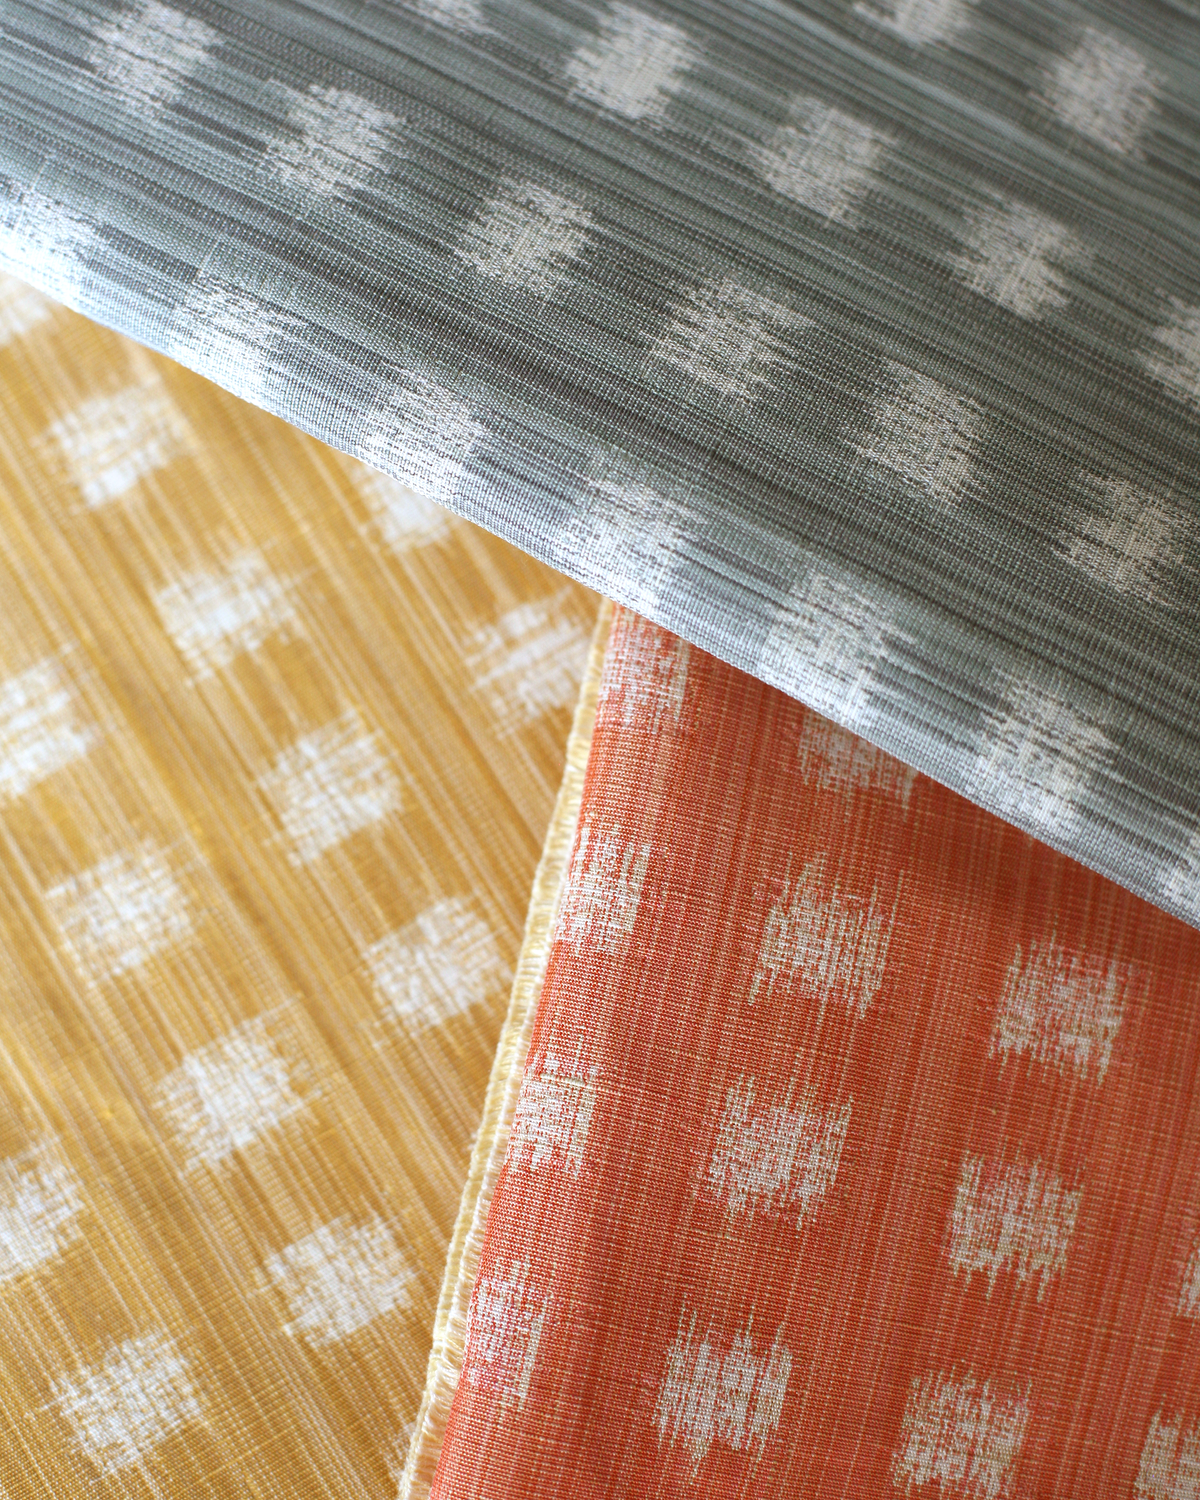 Gridded Ikat Fabric in Pale Marine